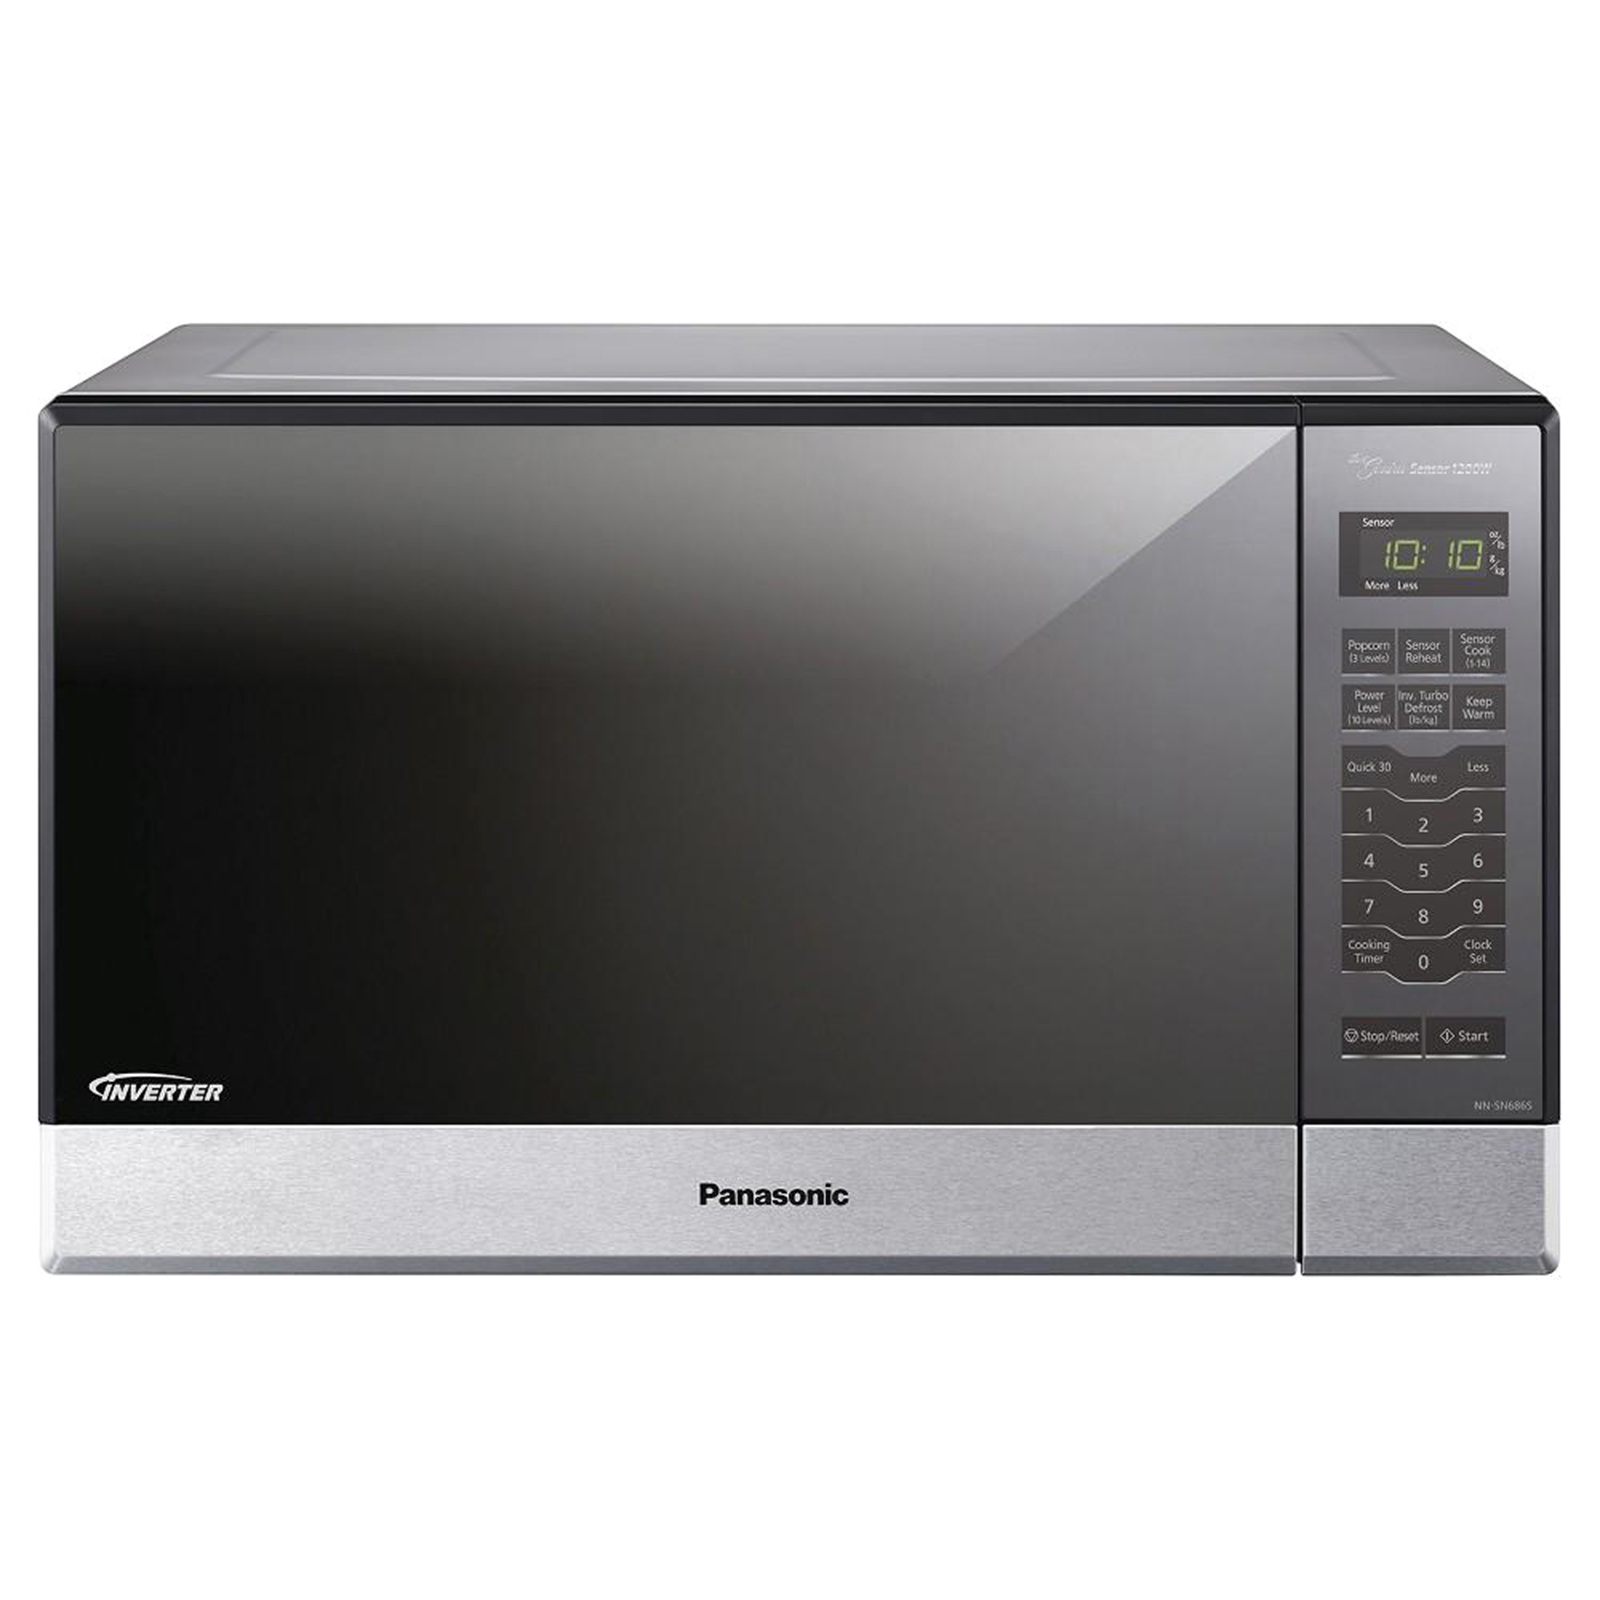 Panasonic NN-SN686SR 1.2cu.ft. Built-In/Countertop Microwave Oven with Inverter - Stainless Steel